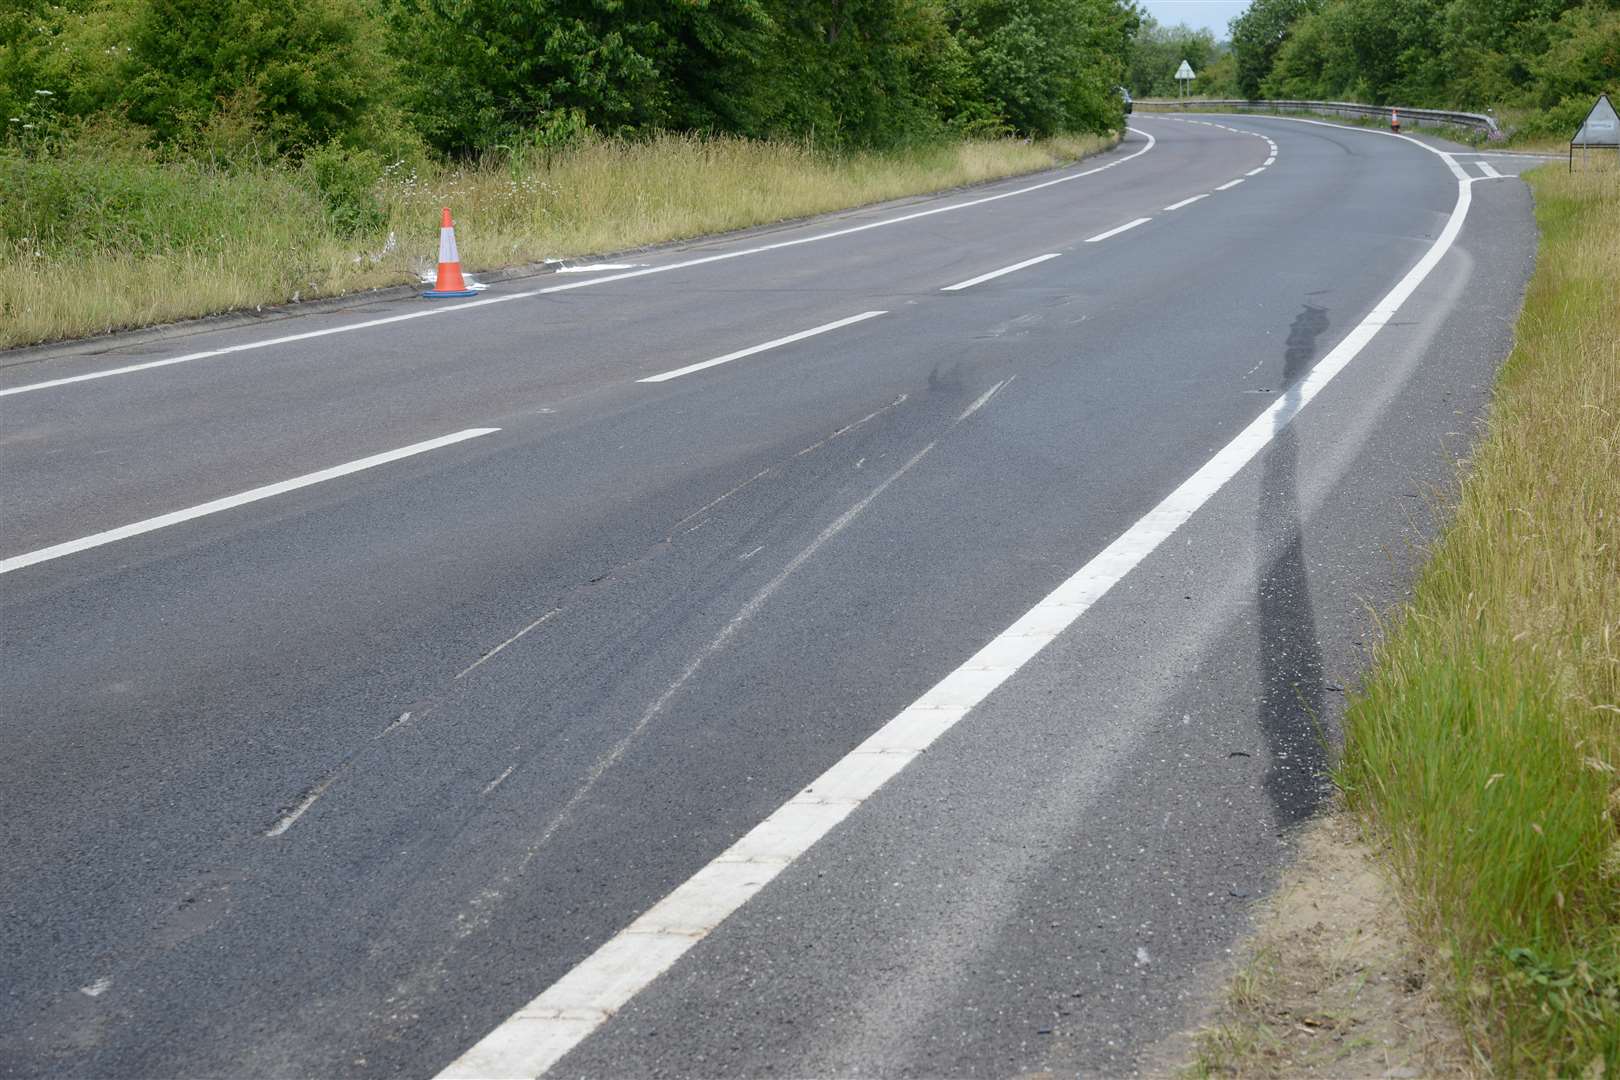 The area of the crash between a Scania lorry and Valerie Munro's silver Vauxhall Astra.